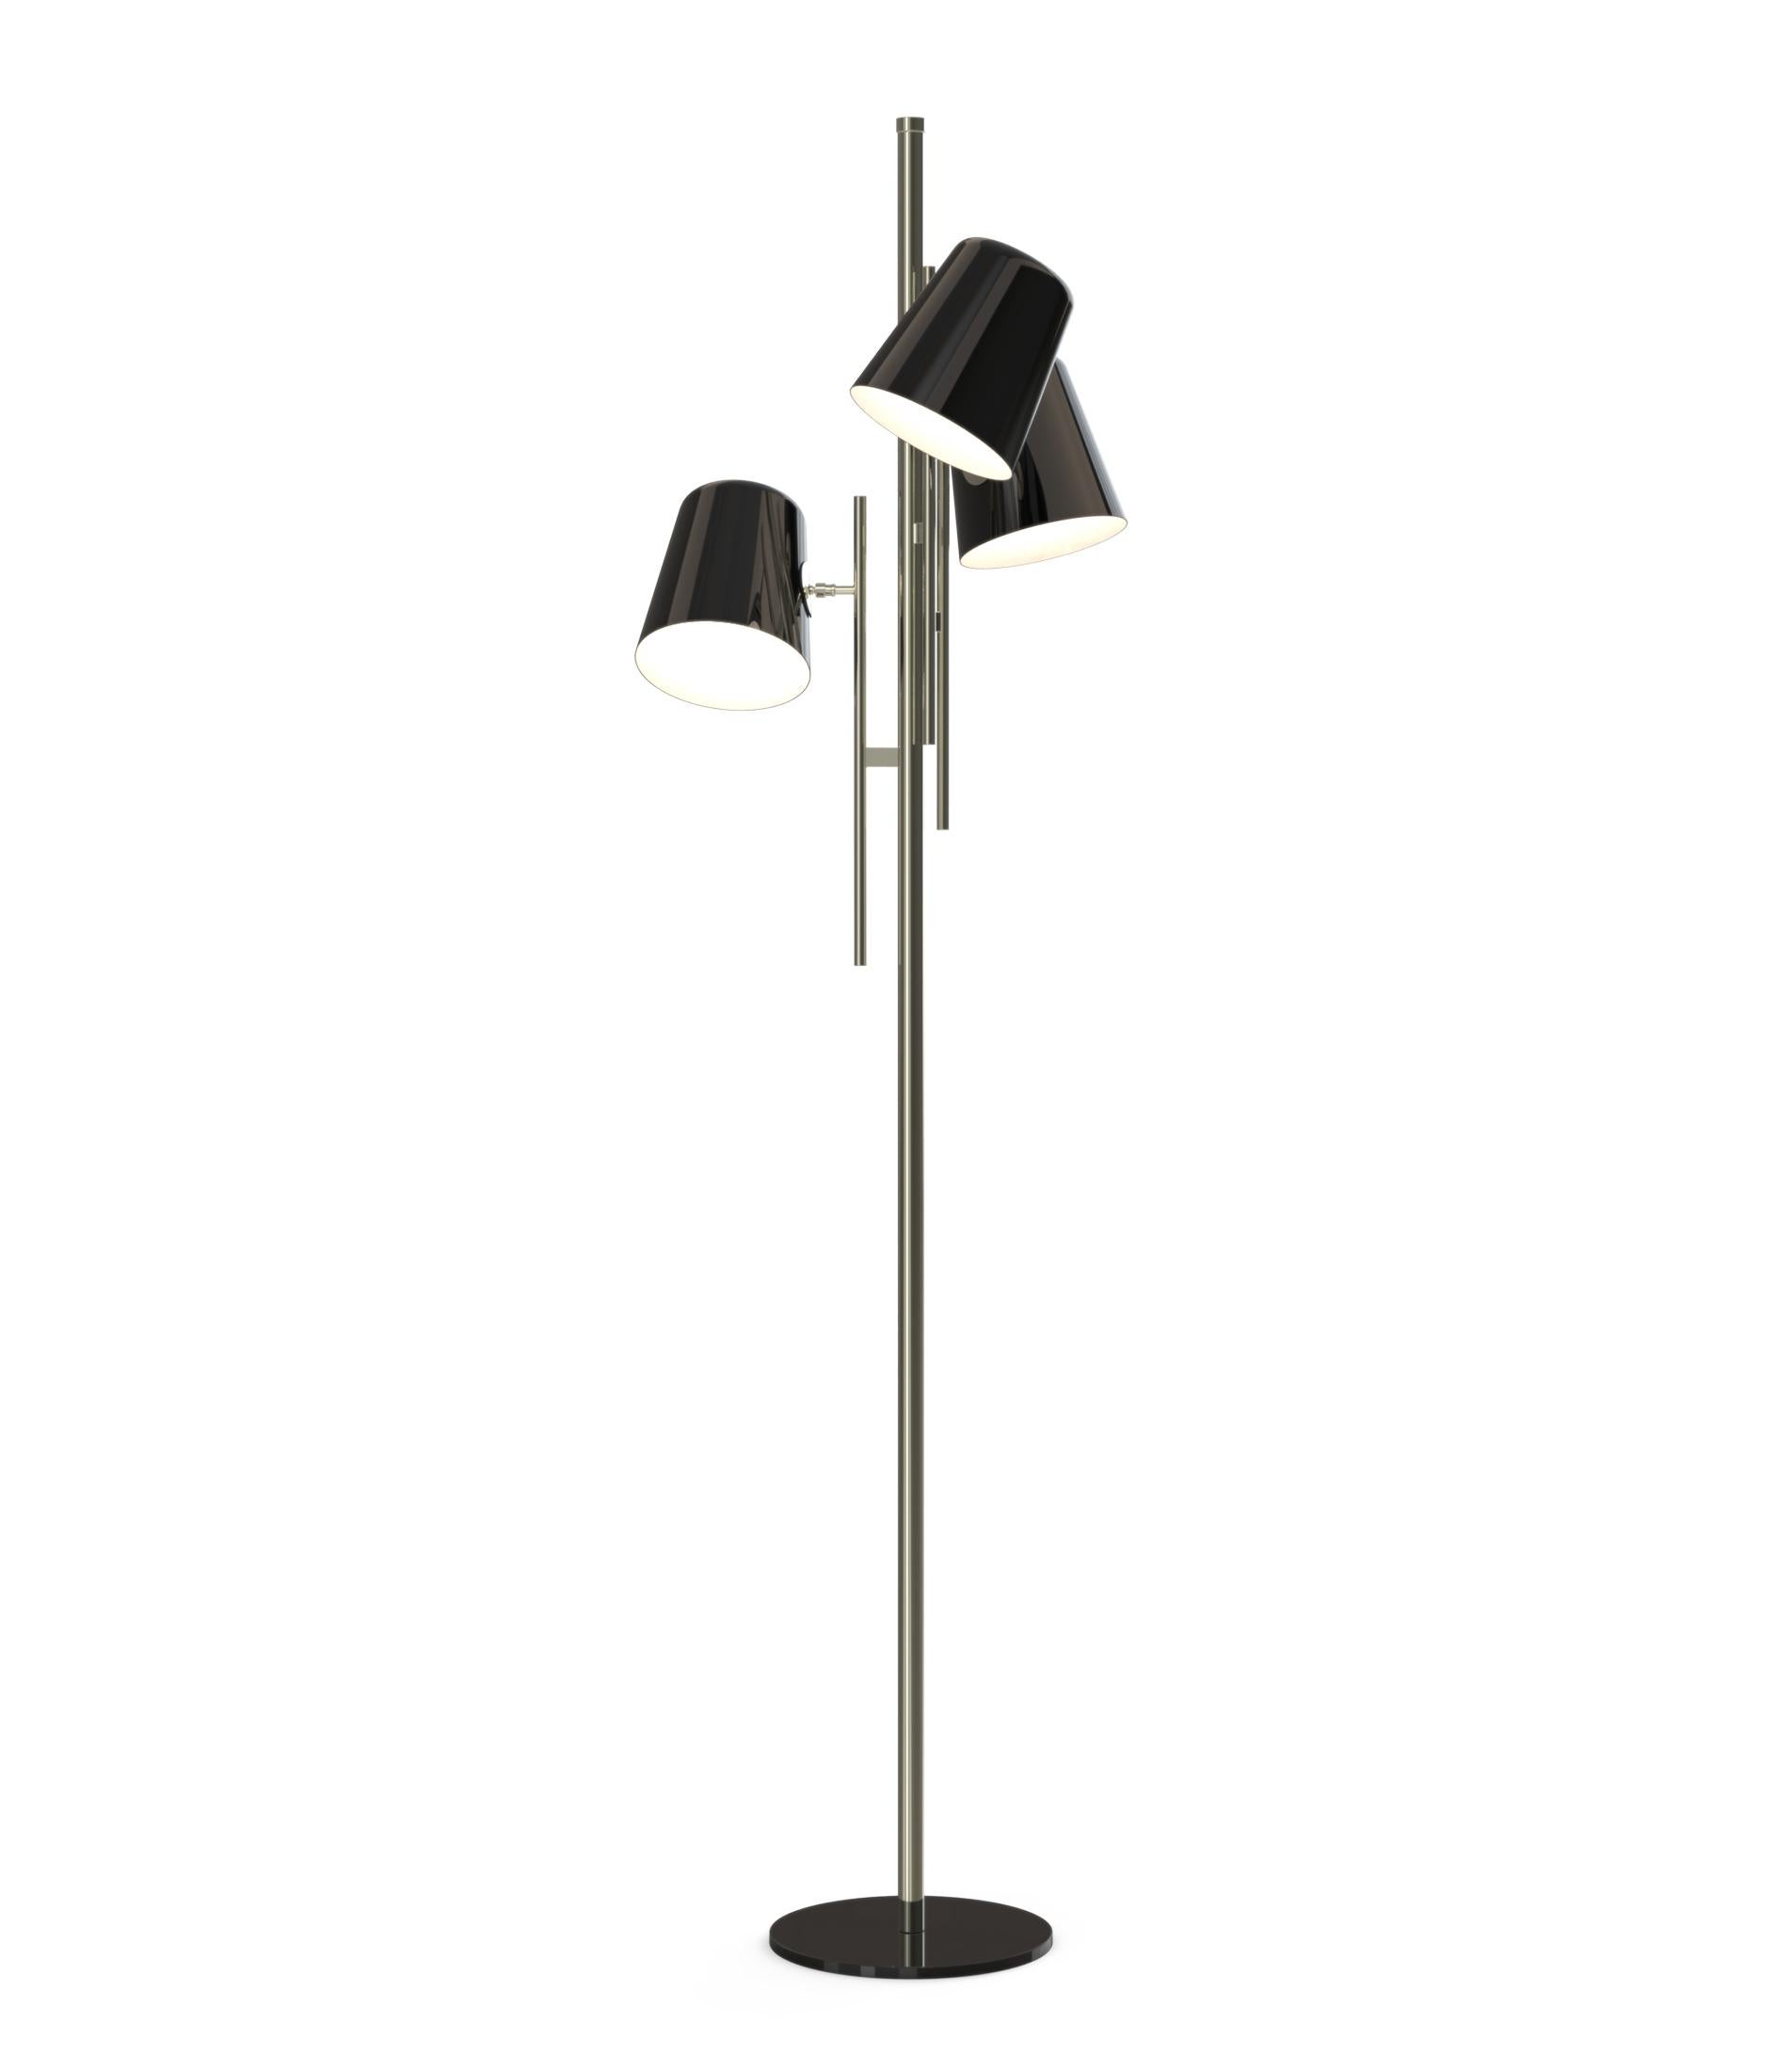 Cole is a retro-inspired floor lamp that has a three-shade design with a glossy black exterior and a matte white interior finishing. The three-cone shades provide plenty of styles as well as flexible lighting. Therefore, these adjustable heads Cole